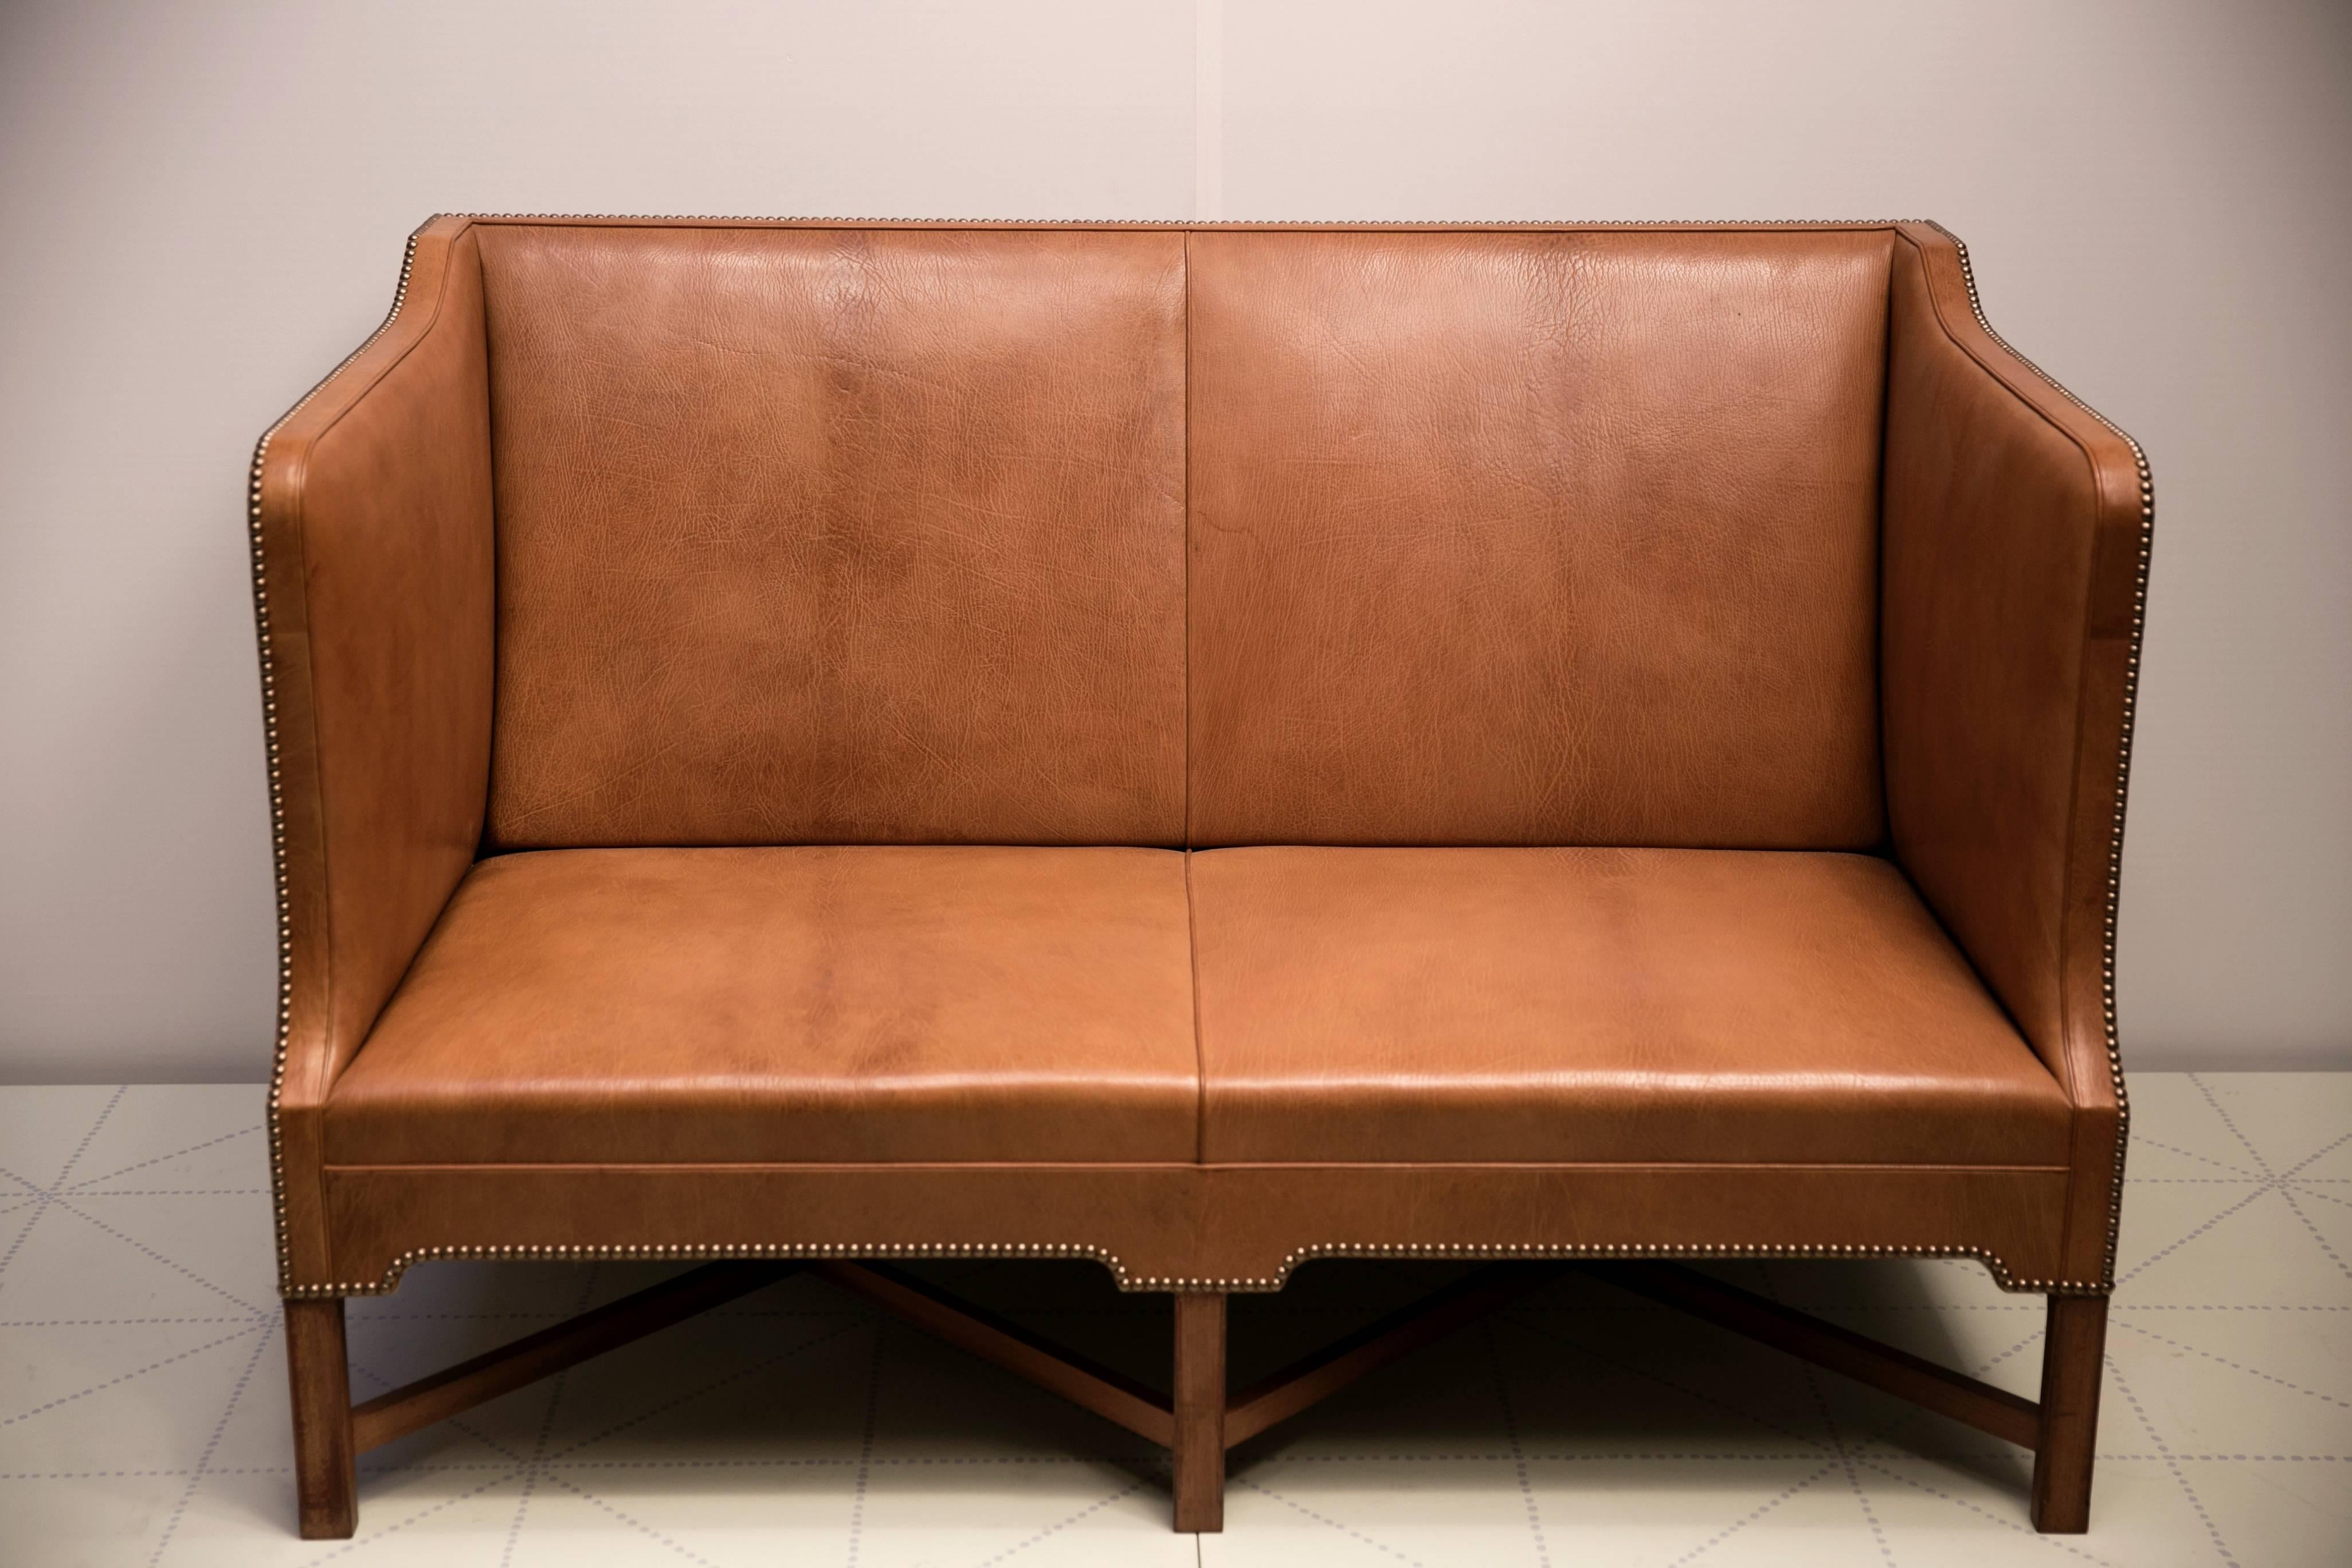 Offered by Vance Trimble, 2 1/2 Person Sofa in Nigerian Goatskin on Cuban Mahogany Legs by Kaare Klint. Made by master cabinetmaker Rud. Rasmussens Snedkerier.

Upholstered in natural Nigerian goatskin with brass nails on Cuban mahogany